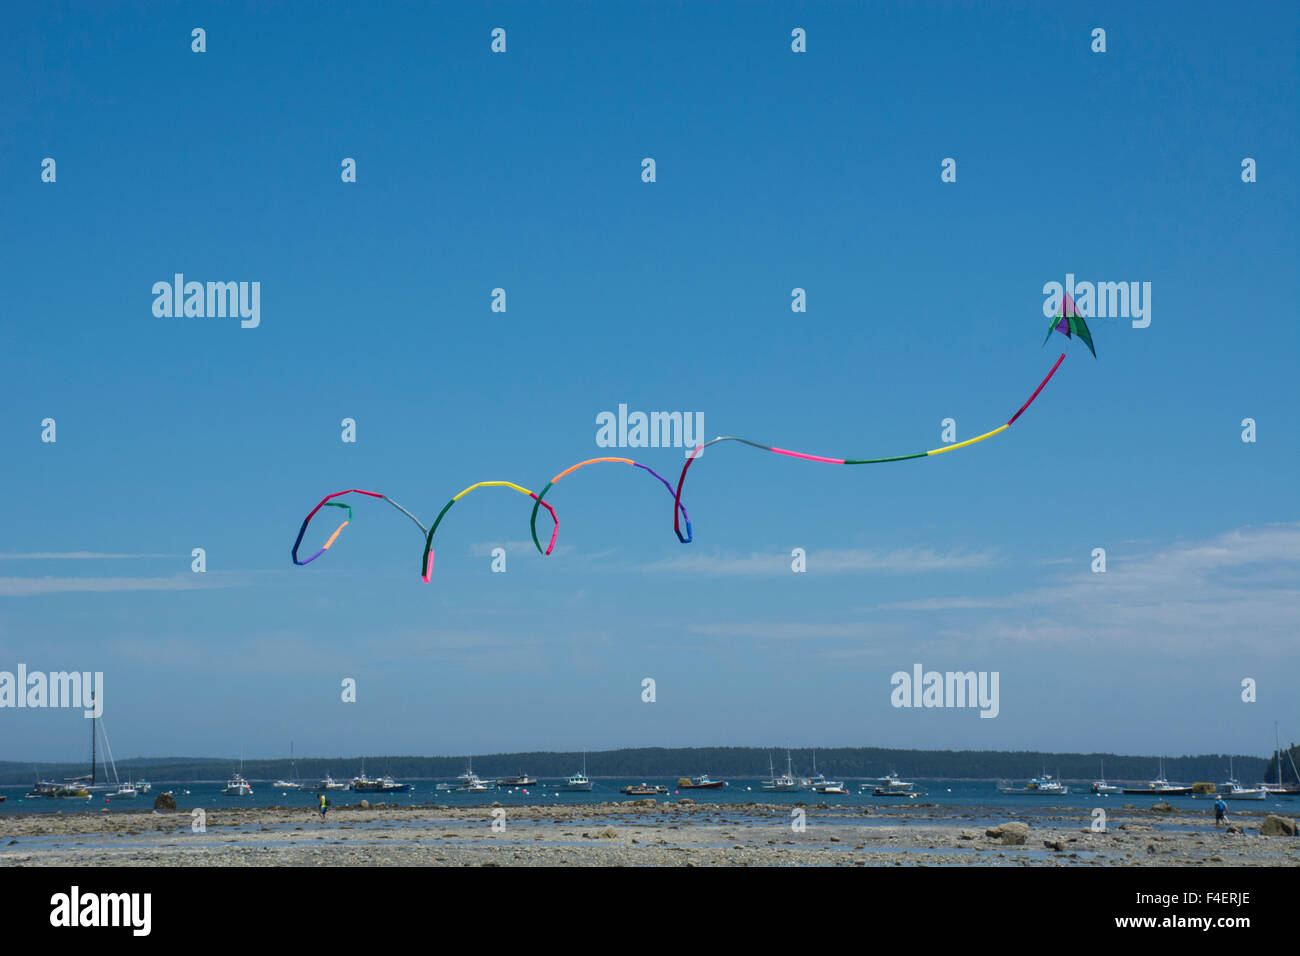 Maine, Bar Harbor. Bar Island, accessed only at low tide by a sandbar that emerges from the ocean. Colorful spinning acrobatic kite flying over the Land Bridge at low tide. Stock Photo